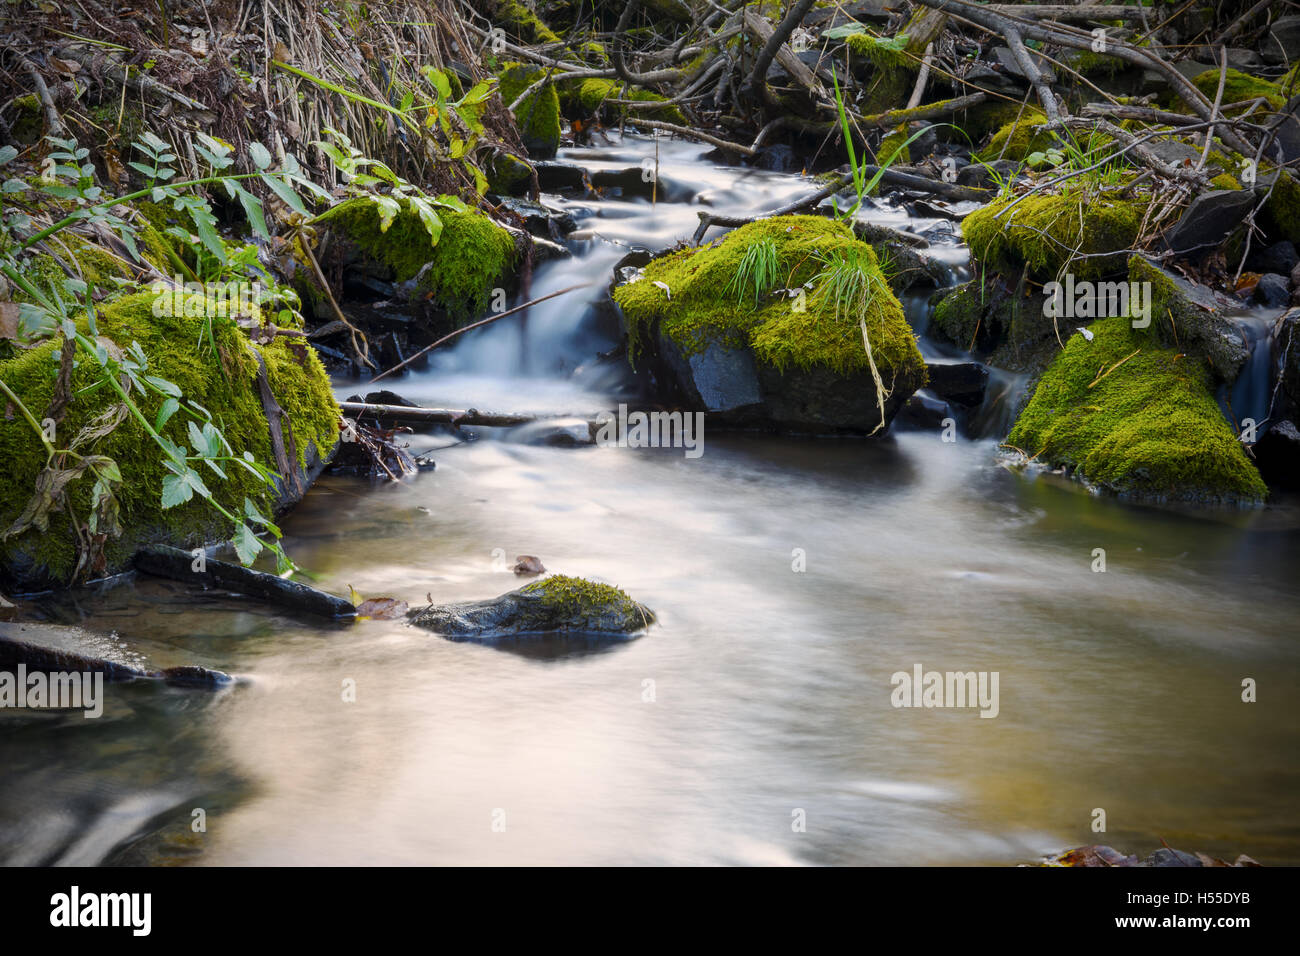 Beautiful landscape with forest creek. The water stream flowing over rocks. Stock Photo